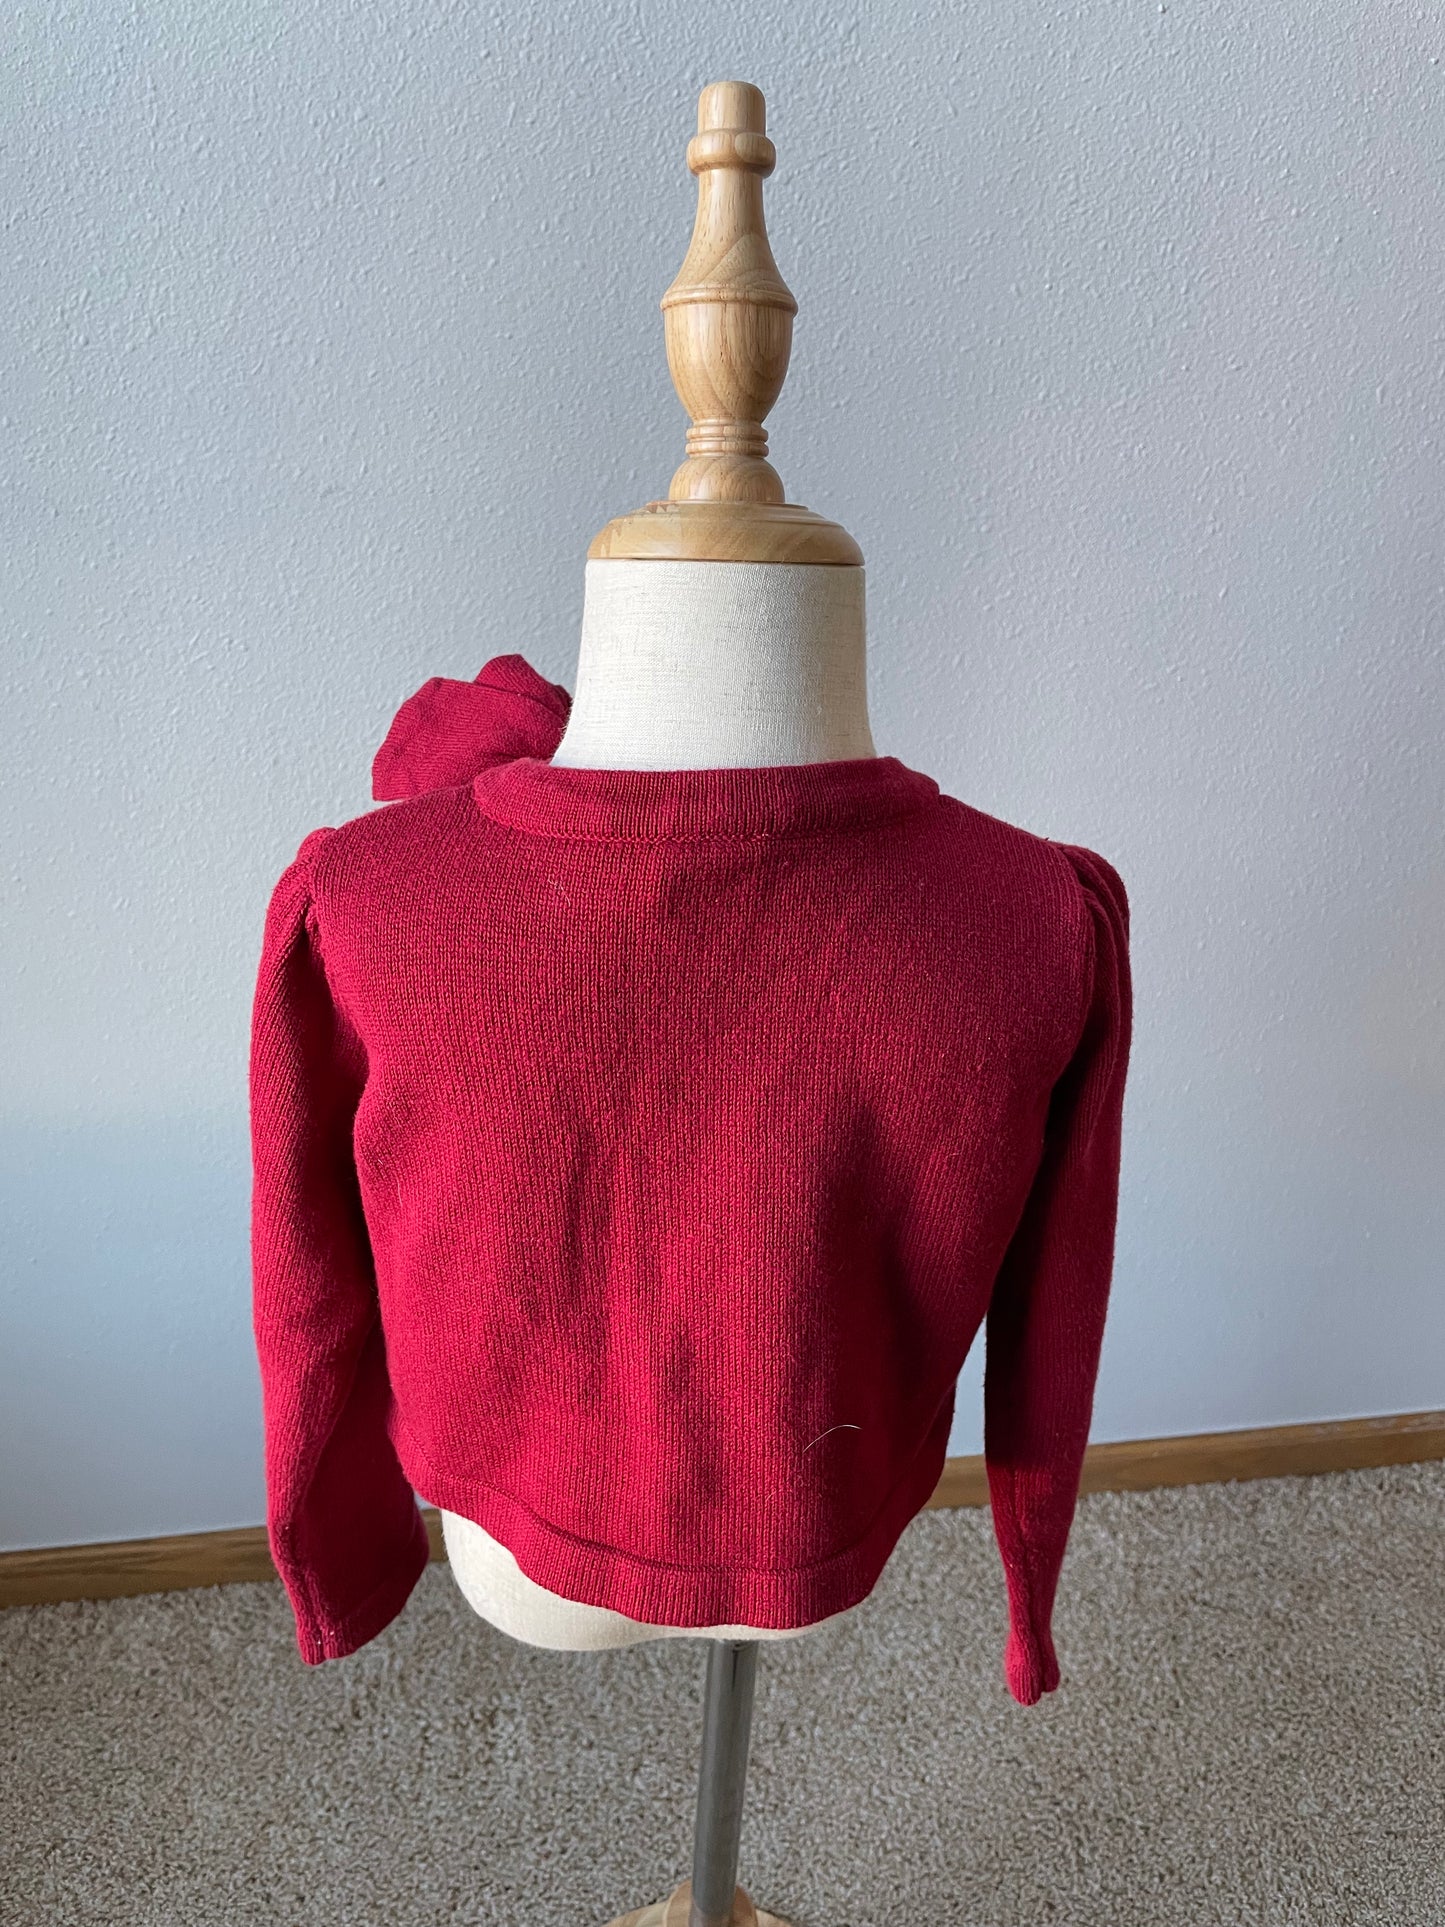 Gymboree Red Cropped Sweater (3T)